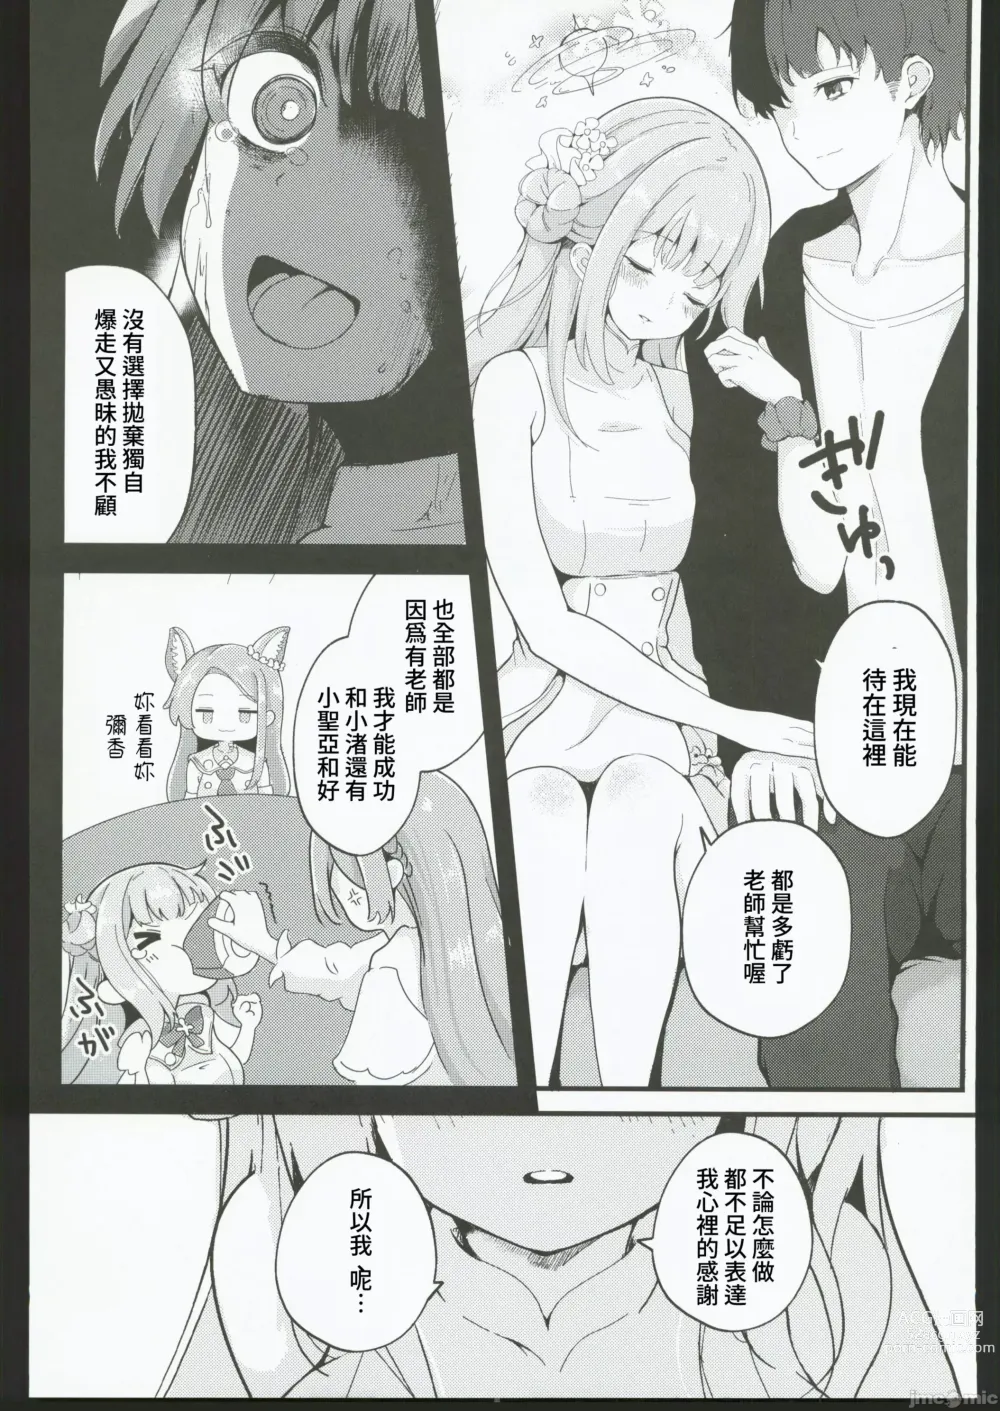 Page 8 of doujinshi Blanc Aile to Otogibanashi - The treaty lost, but hope remains.